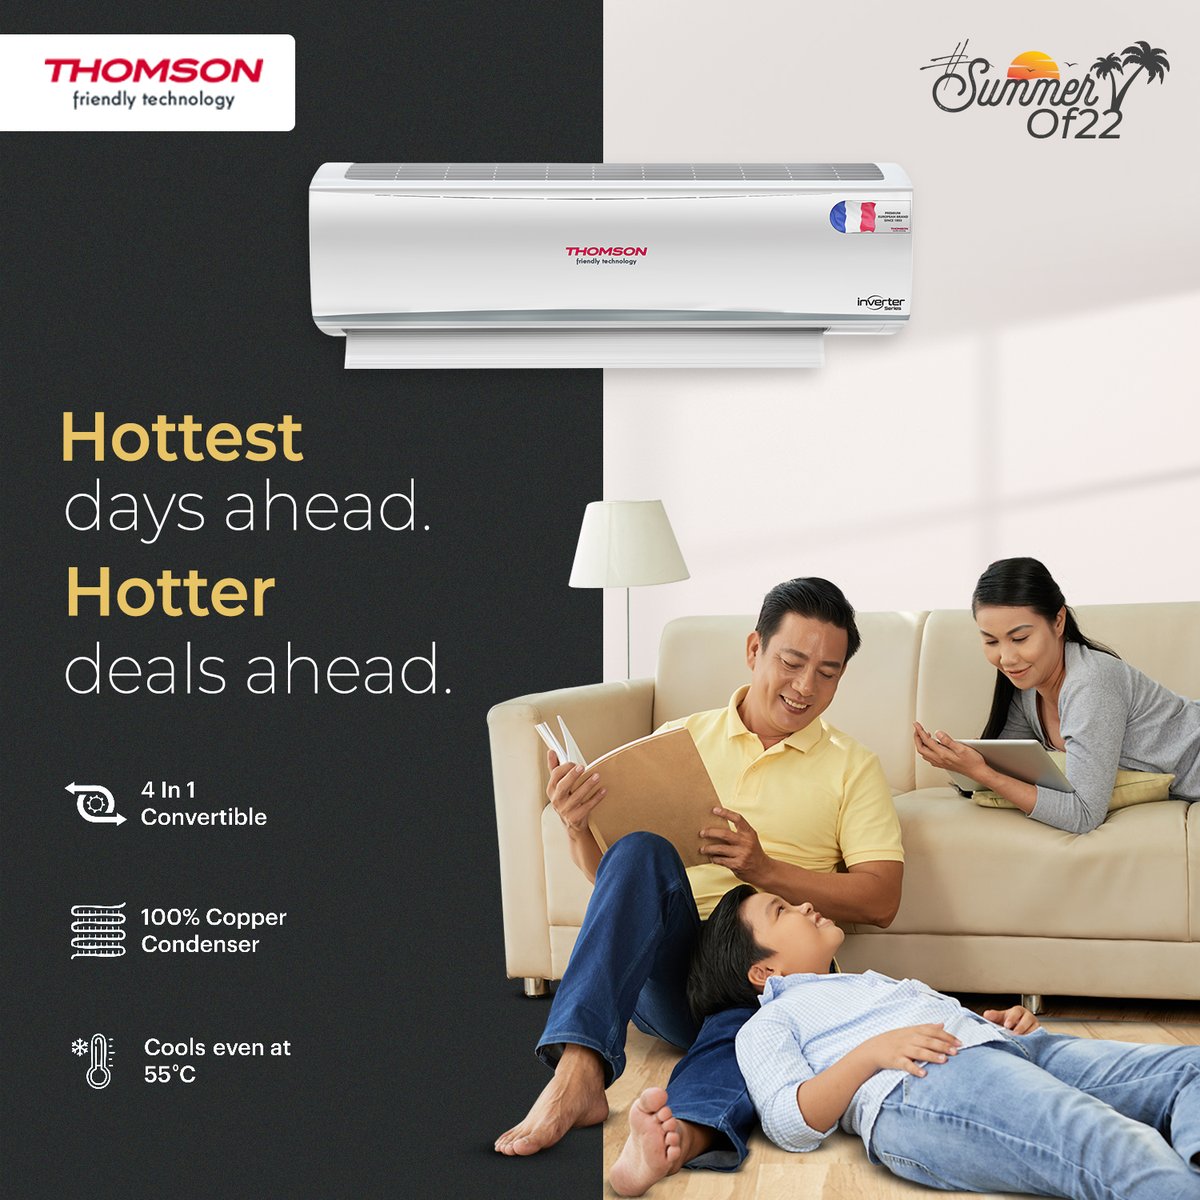 Summers don't have to be so exhausting anymore. Take the cooler route with a Thomson AC now.

Buy now: bit.ly/3weTcVM
#Thomson #ThomsonHomes #Technology #Innovation #VisualQuality #HighQuality #AirConditioner #4in1Convertible #CopperCondenser #BestCooling